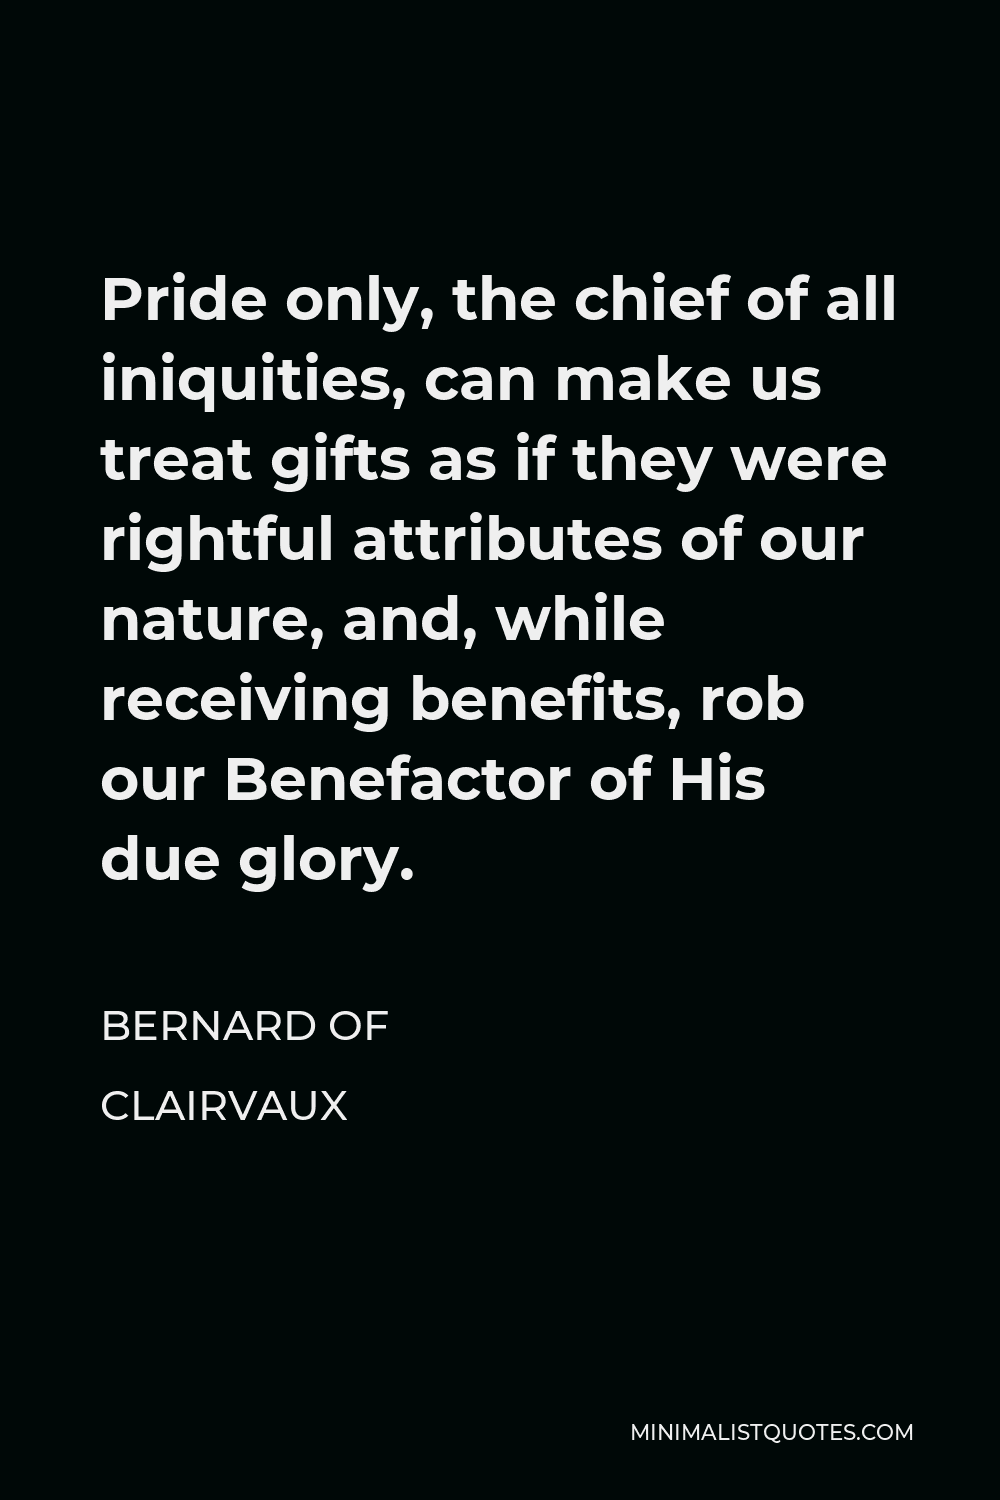 Bernard of Clairvaux Quote - Pride only, the chief of all iniquities, can make us treat gifts as if they were rightful attributes of our nature, and, while receiving benefits, rob our Benefactor of His due glory.